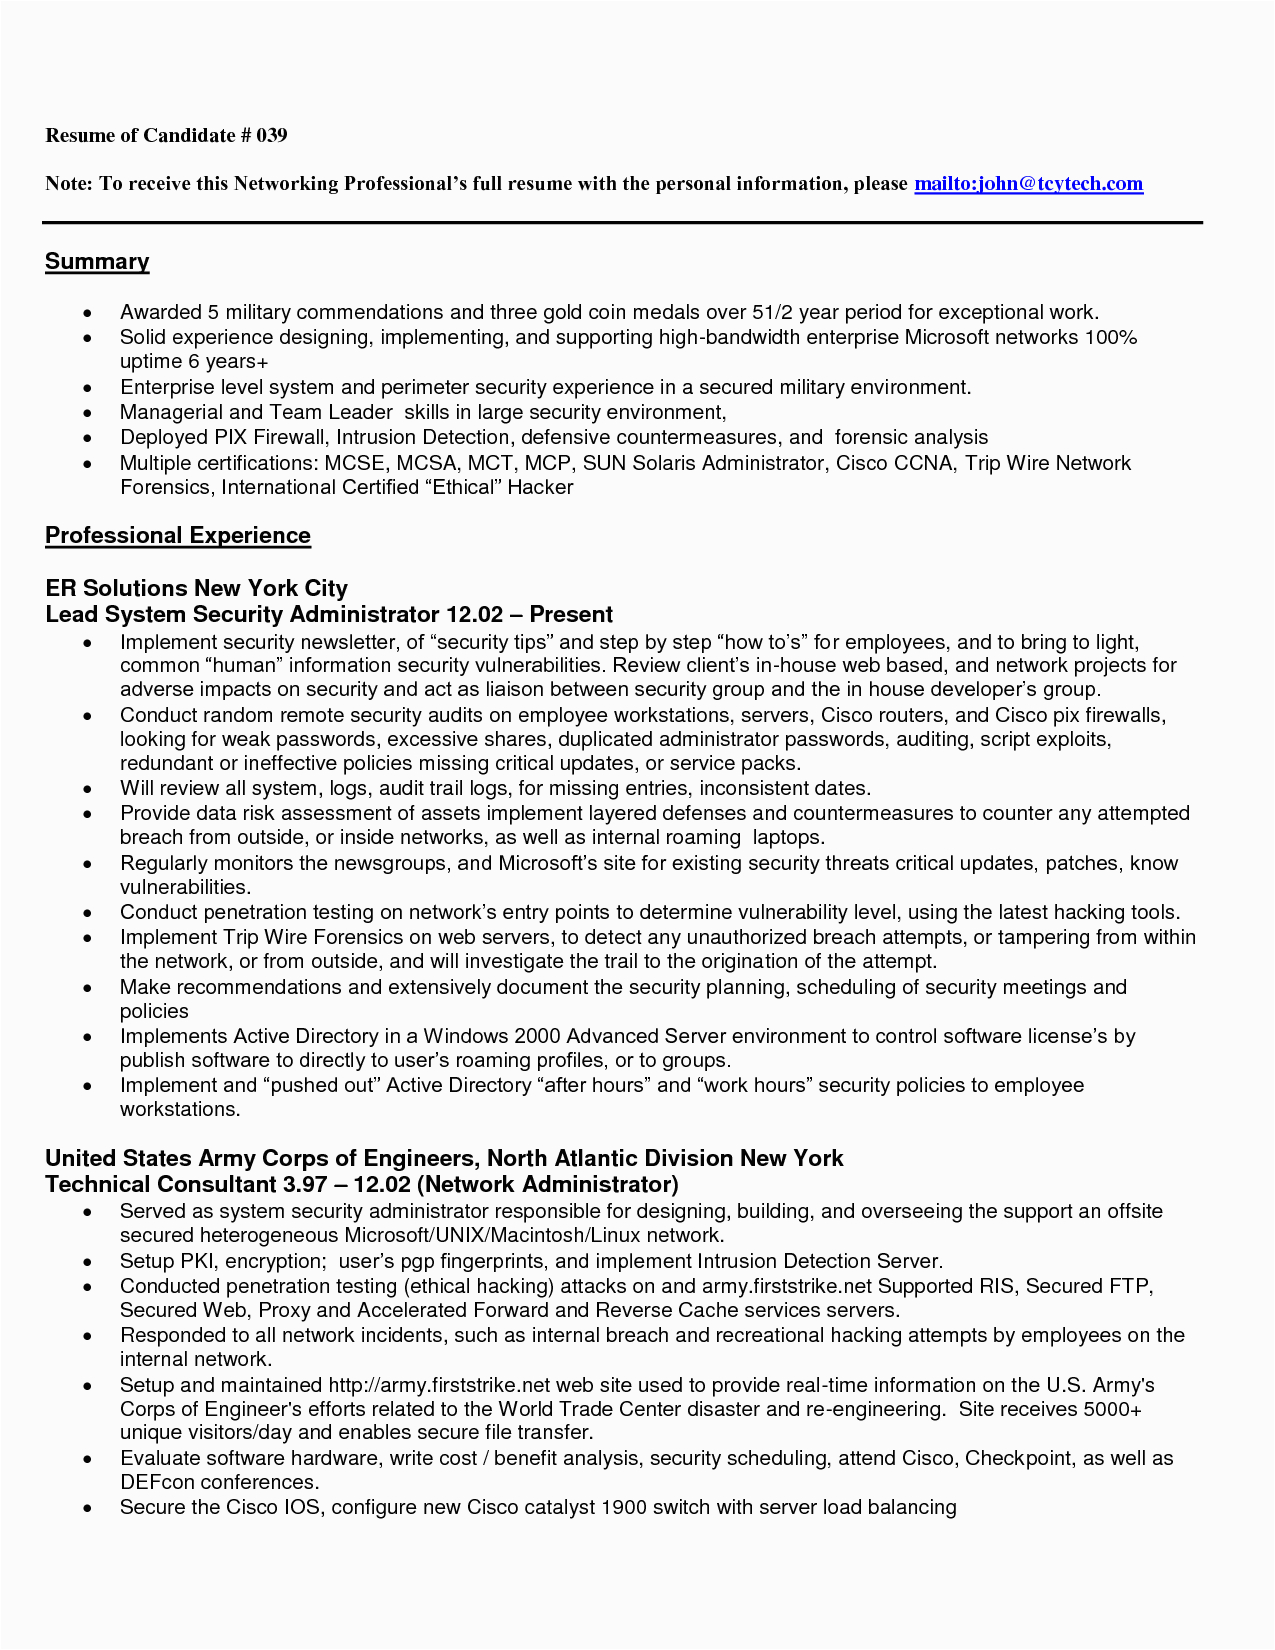 Sample Resume for Entry Level software Positions Entry Level software Engineer Resume – Task List Templates